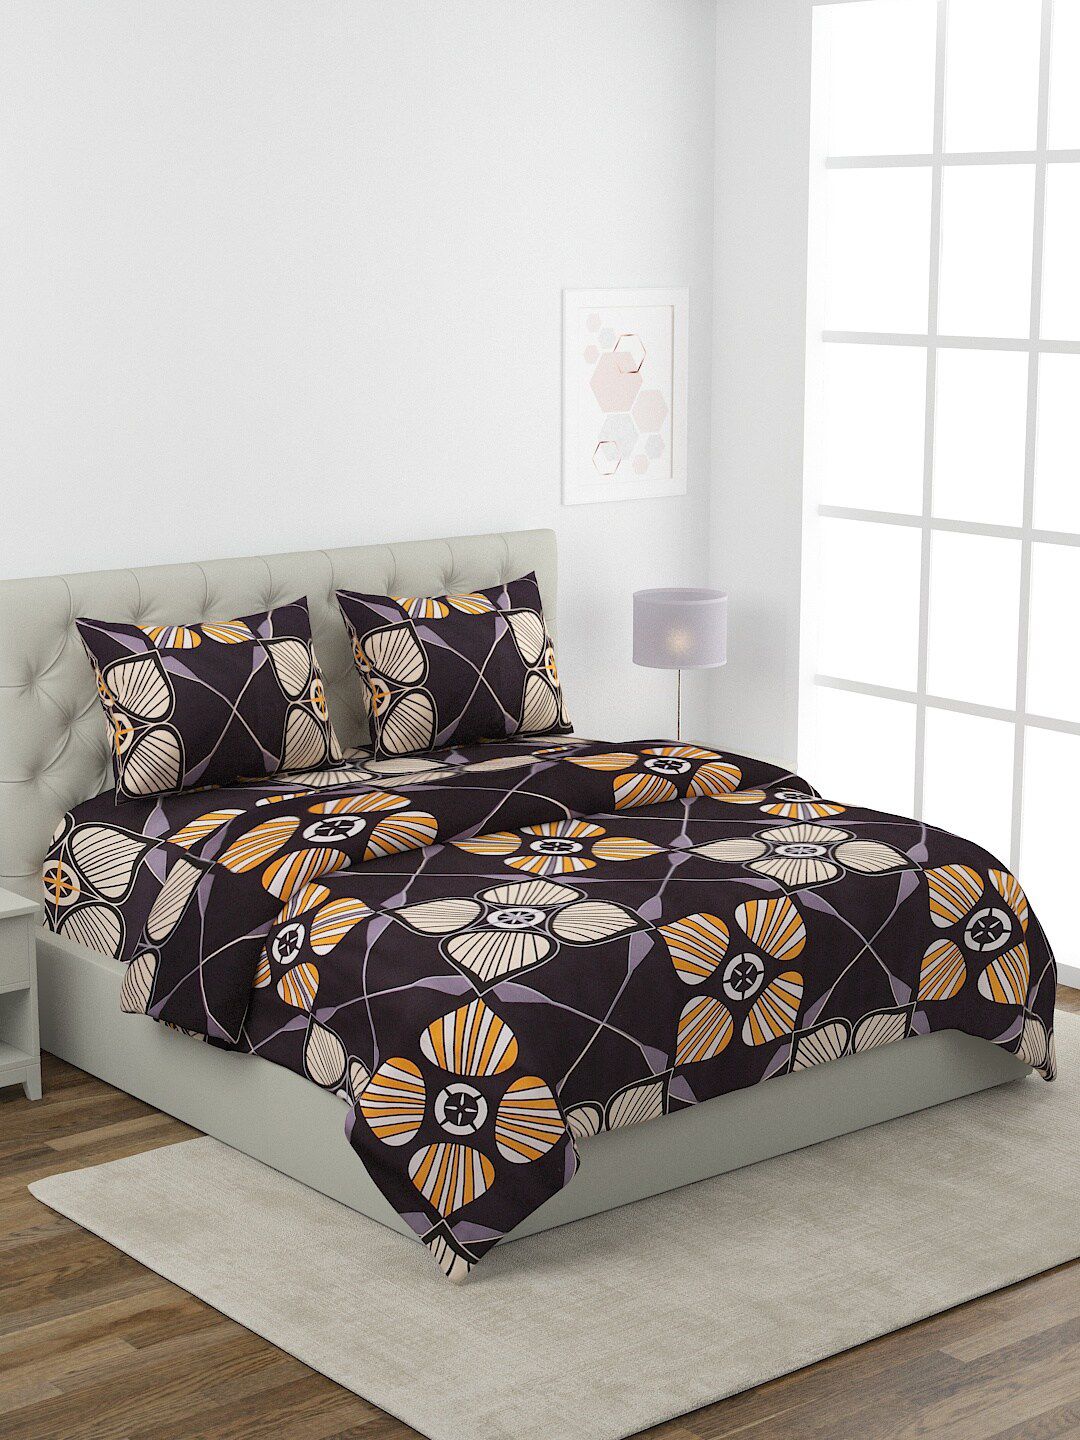 ROMEE Black Floral Printed King Size Pure Cotton Bedding Set Price in India